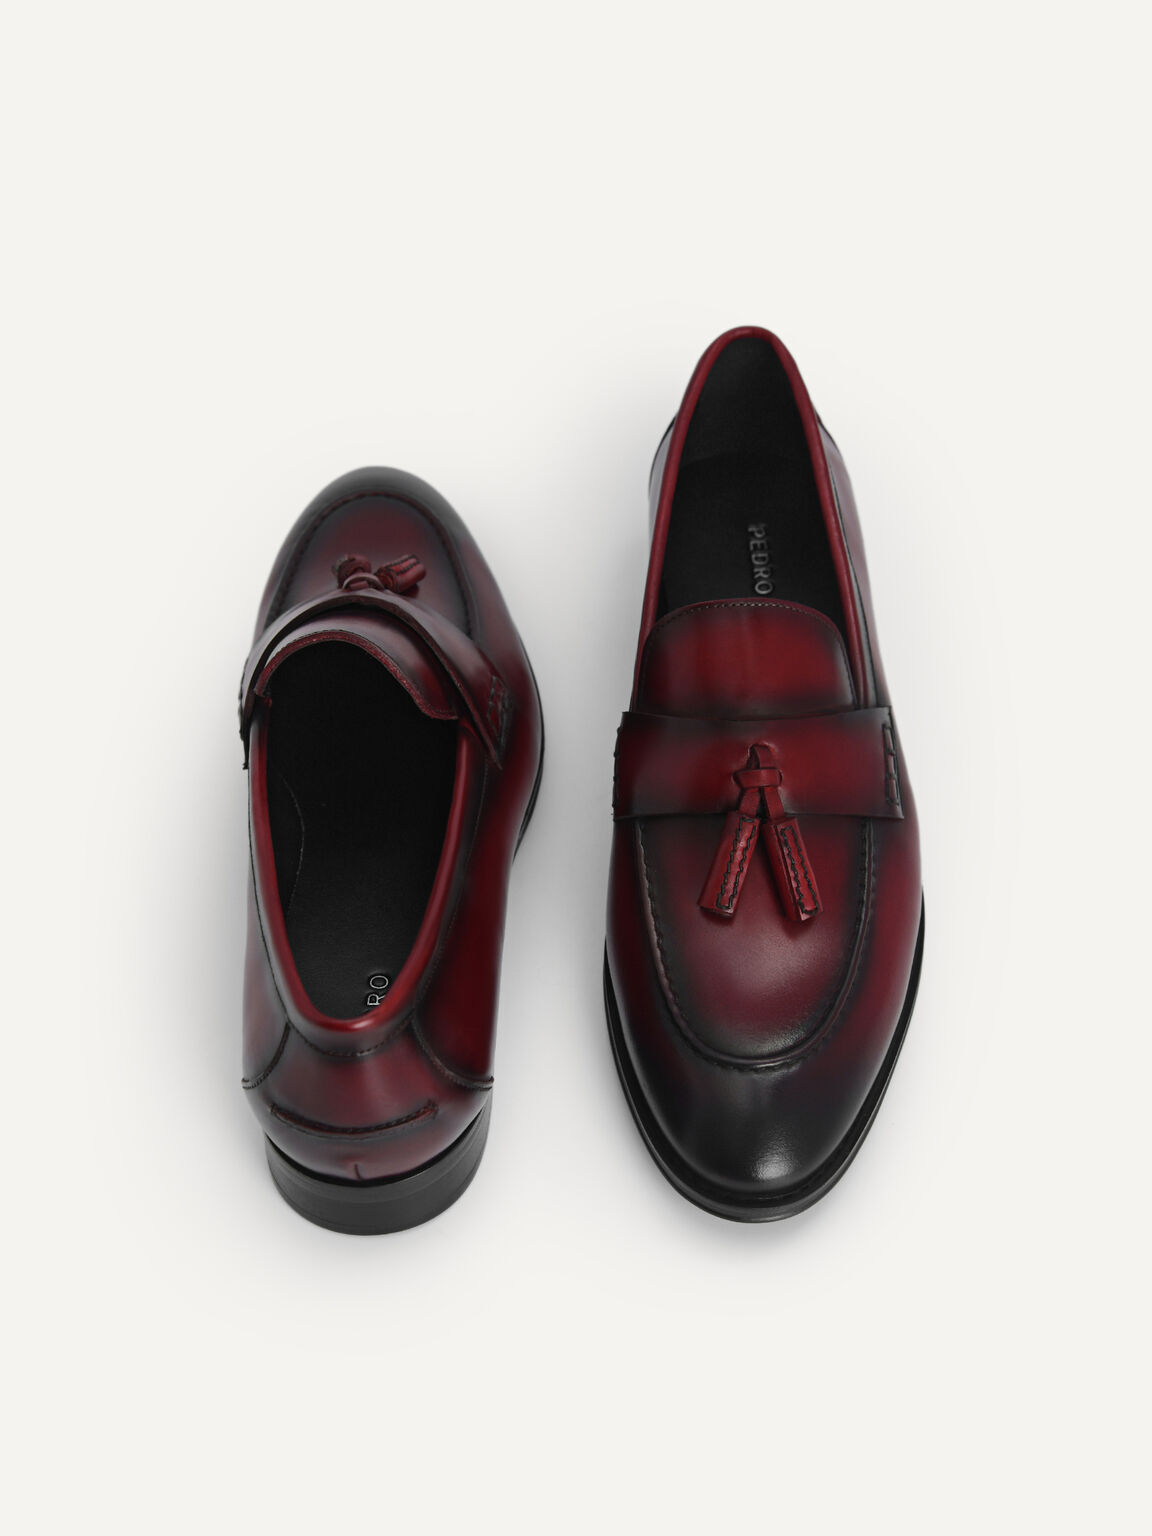 Burnished Leather Tasselled Loafers, Mahogany, hi-res